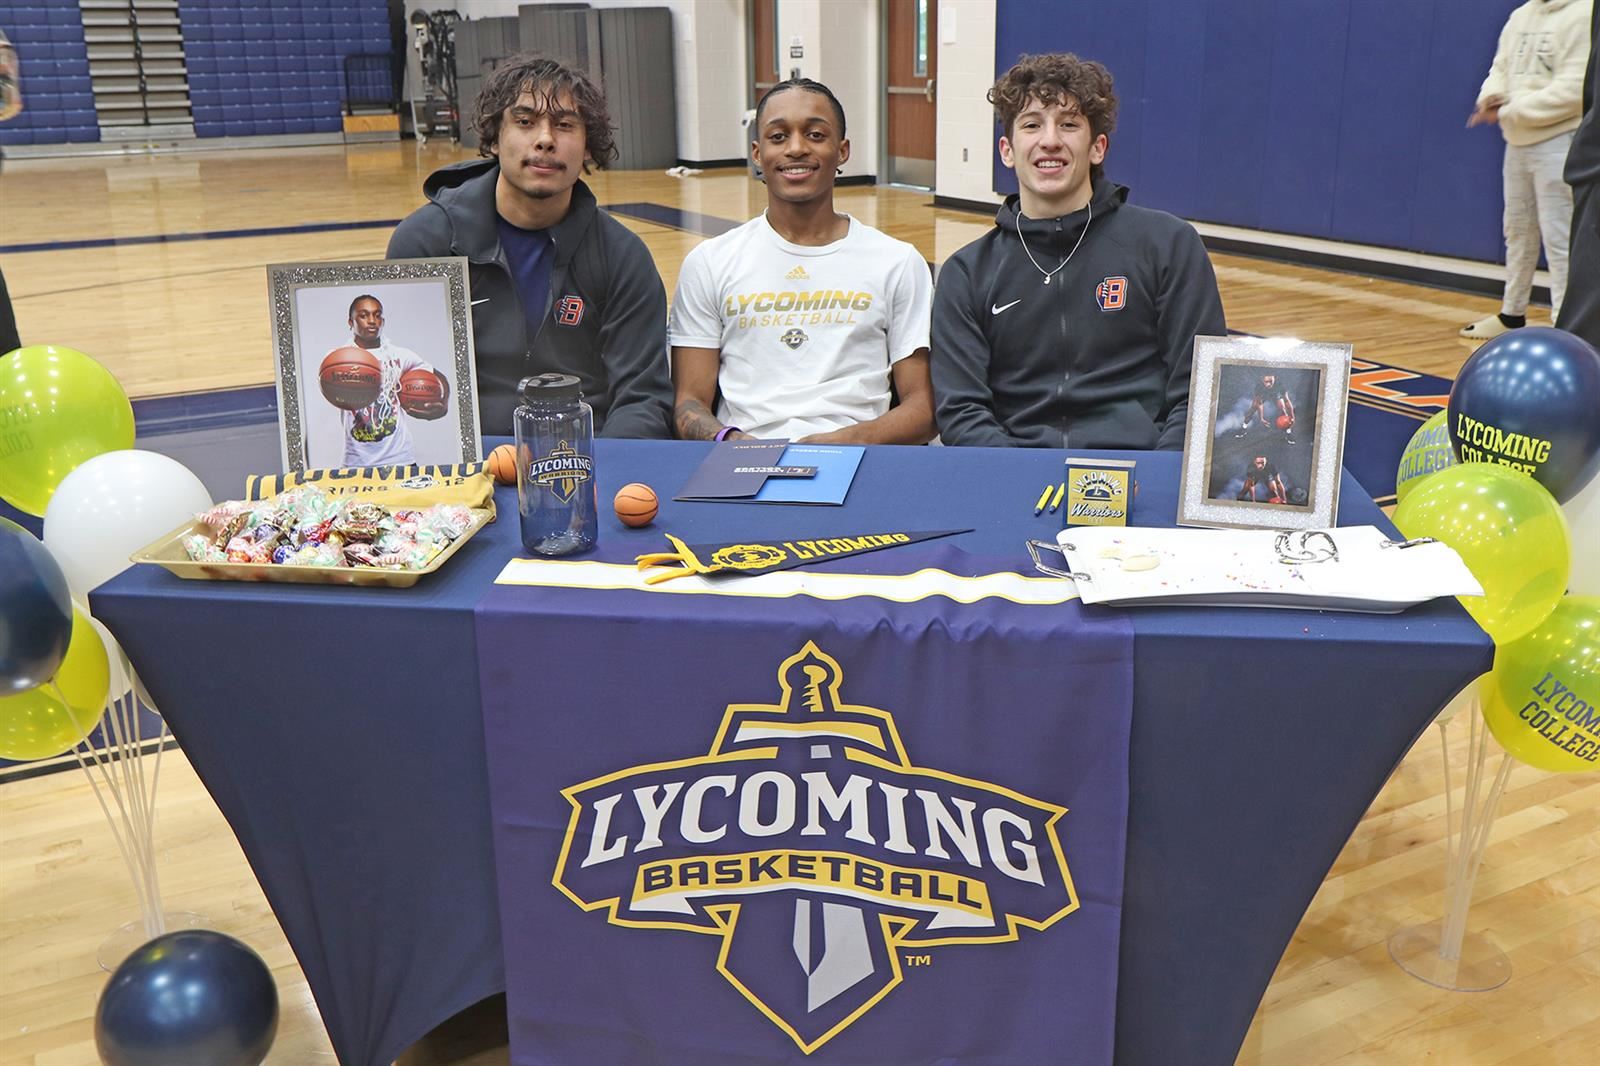 Bridgeland High School senior Aiden White, center, signed a letter of intent to play basketball at Lycoming College.